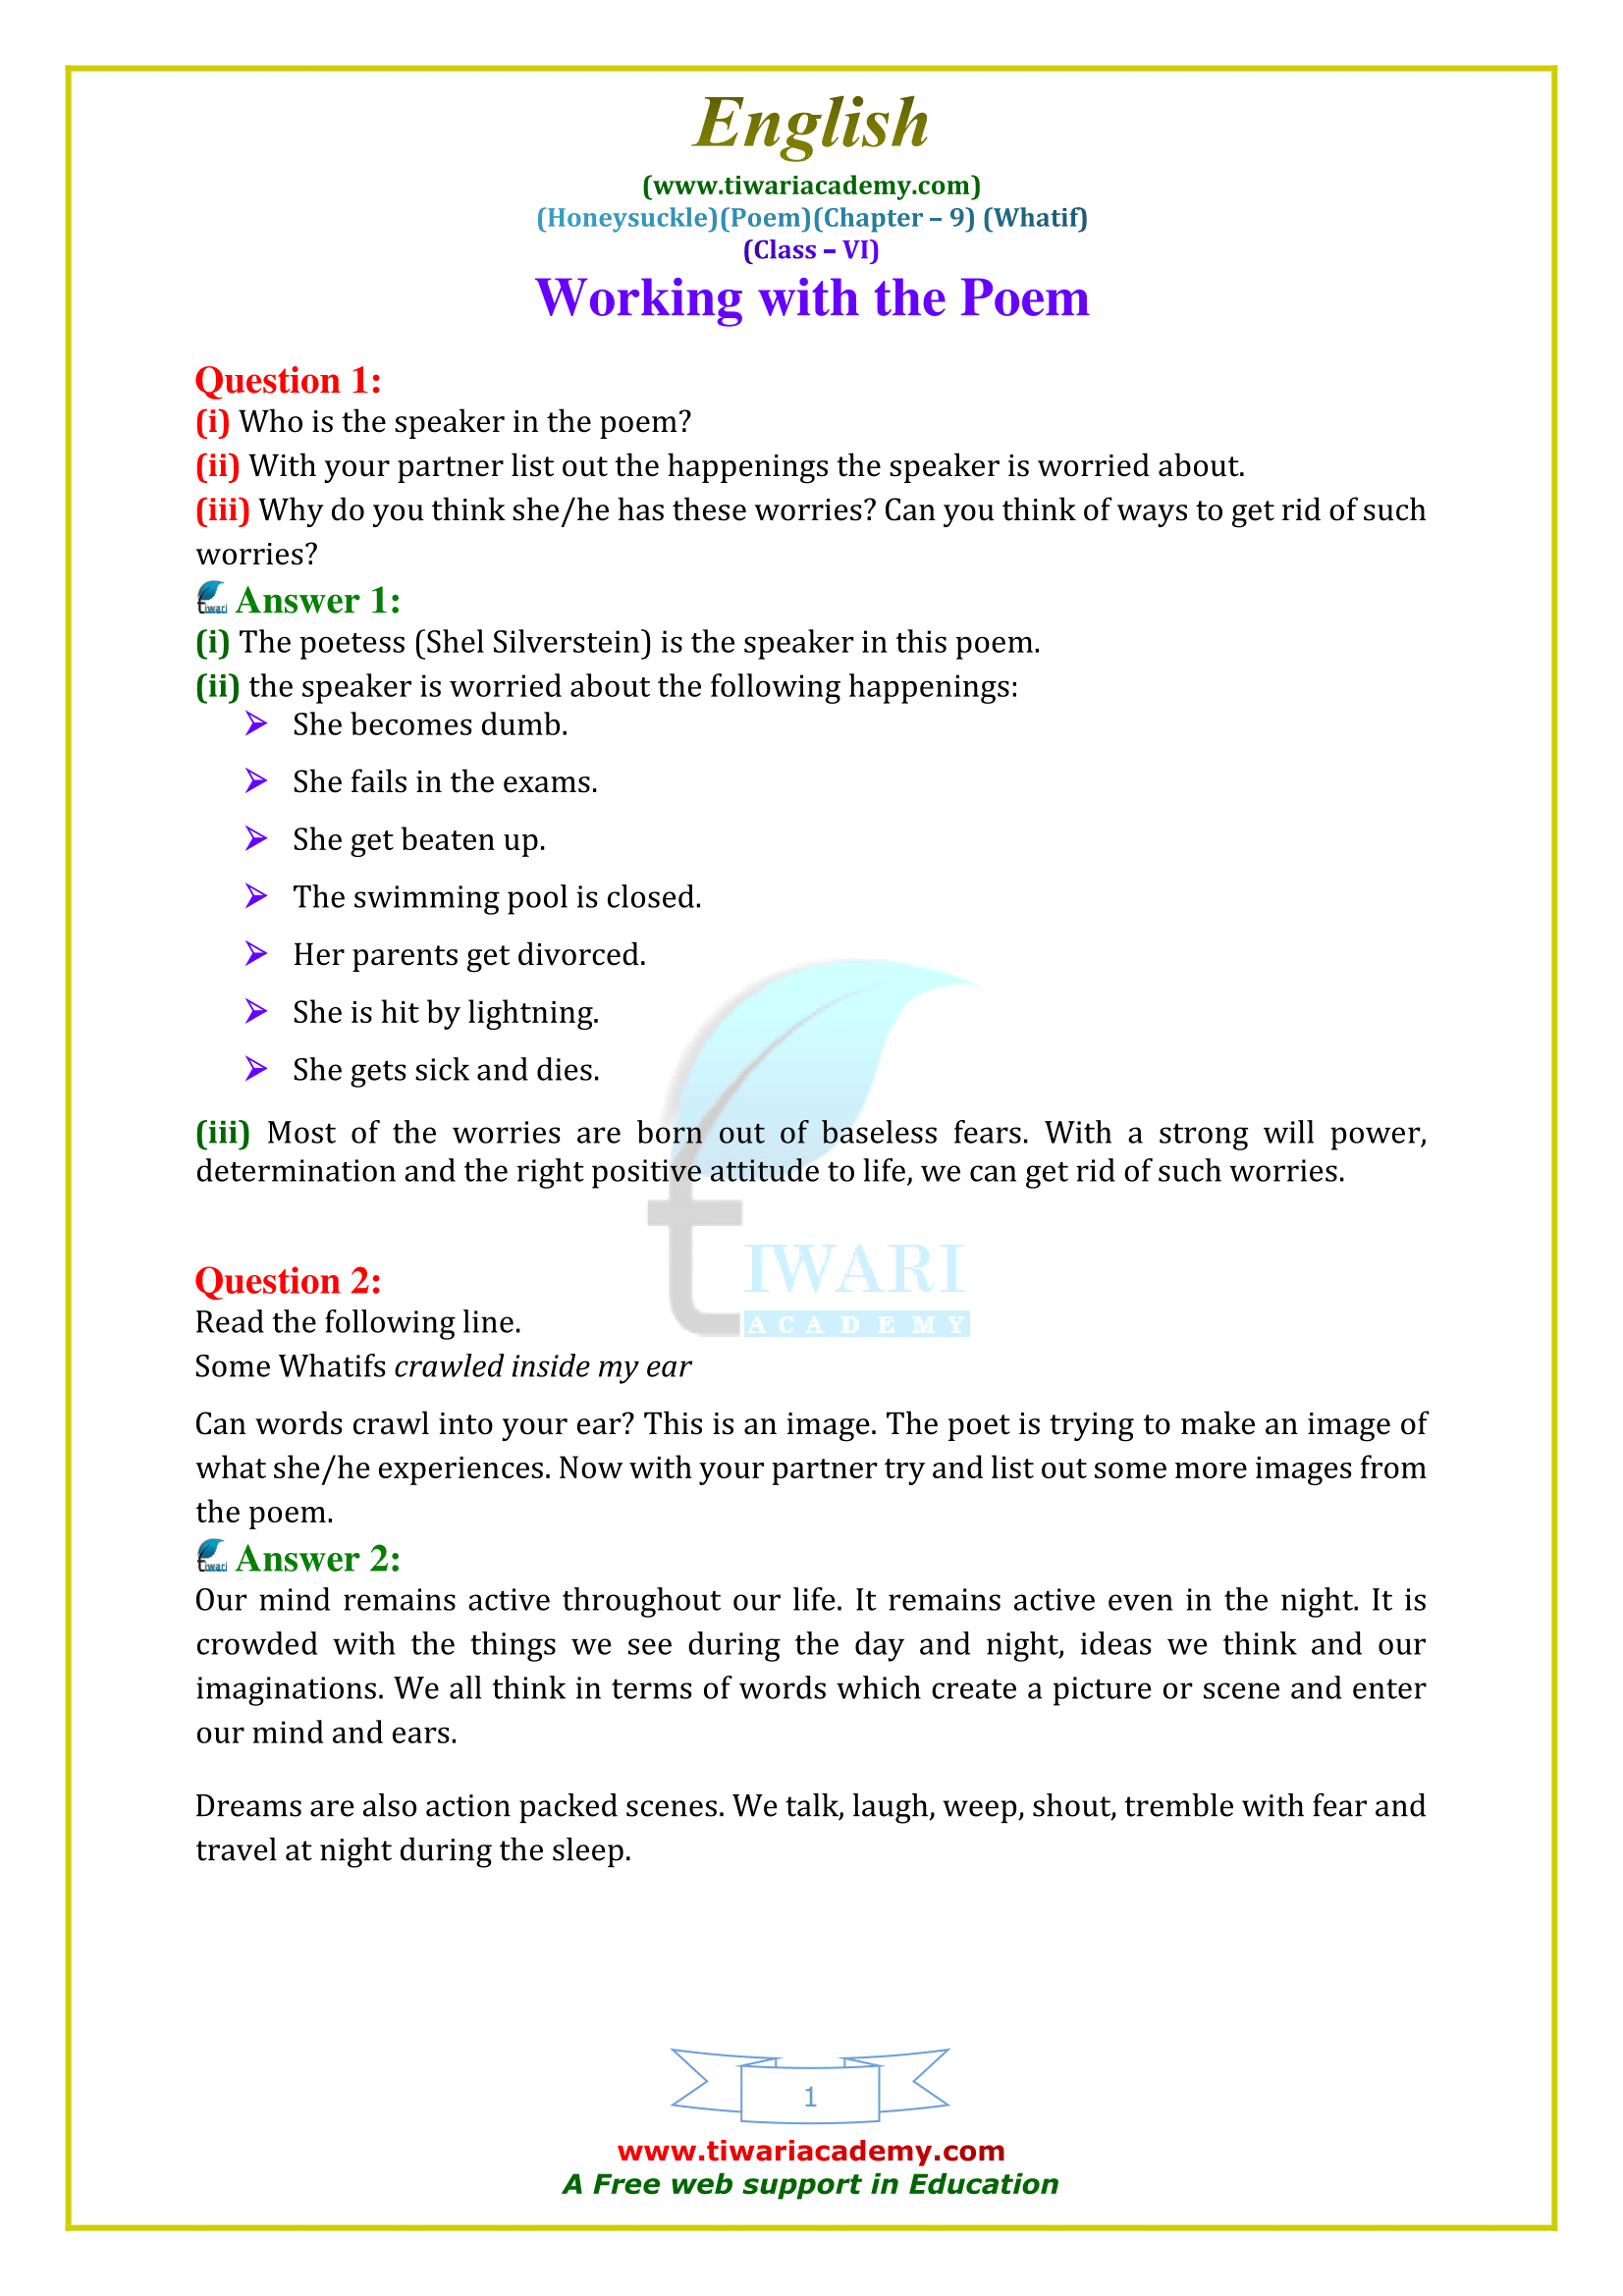 NCERT Solutions for Class 6 English Honeysuckle Poem 9 Whatif